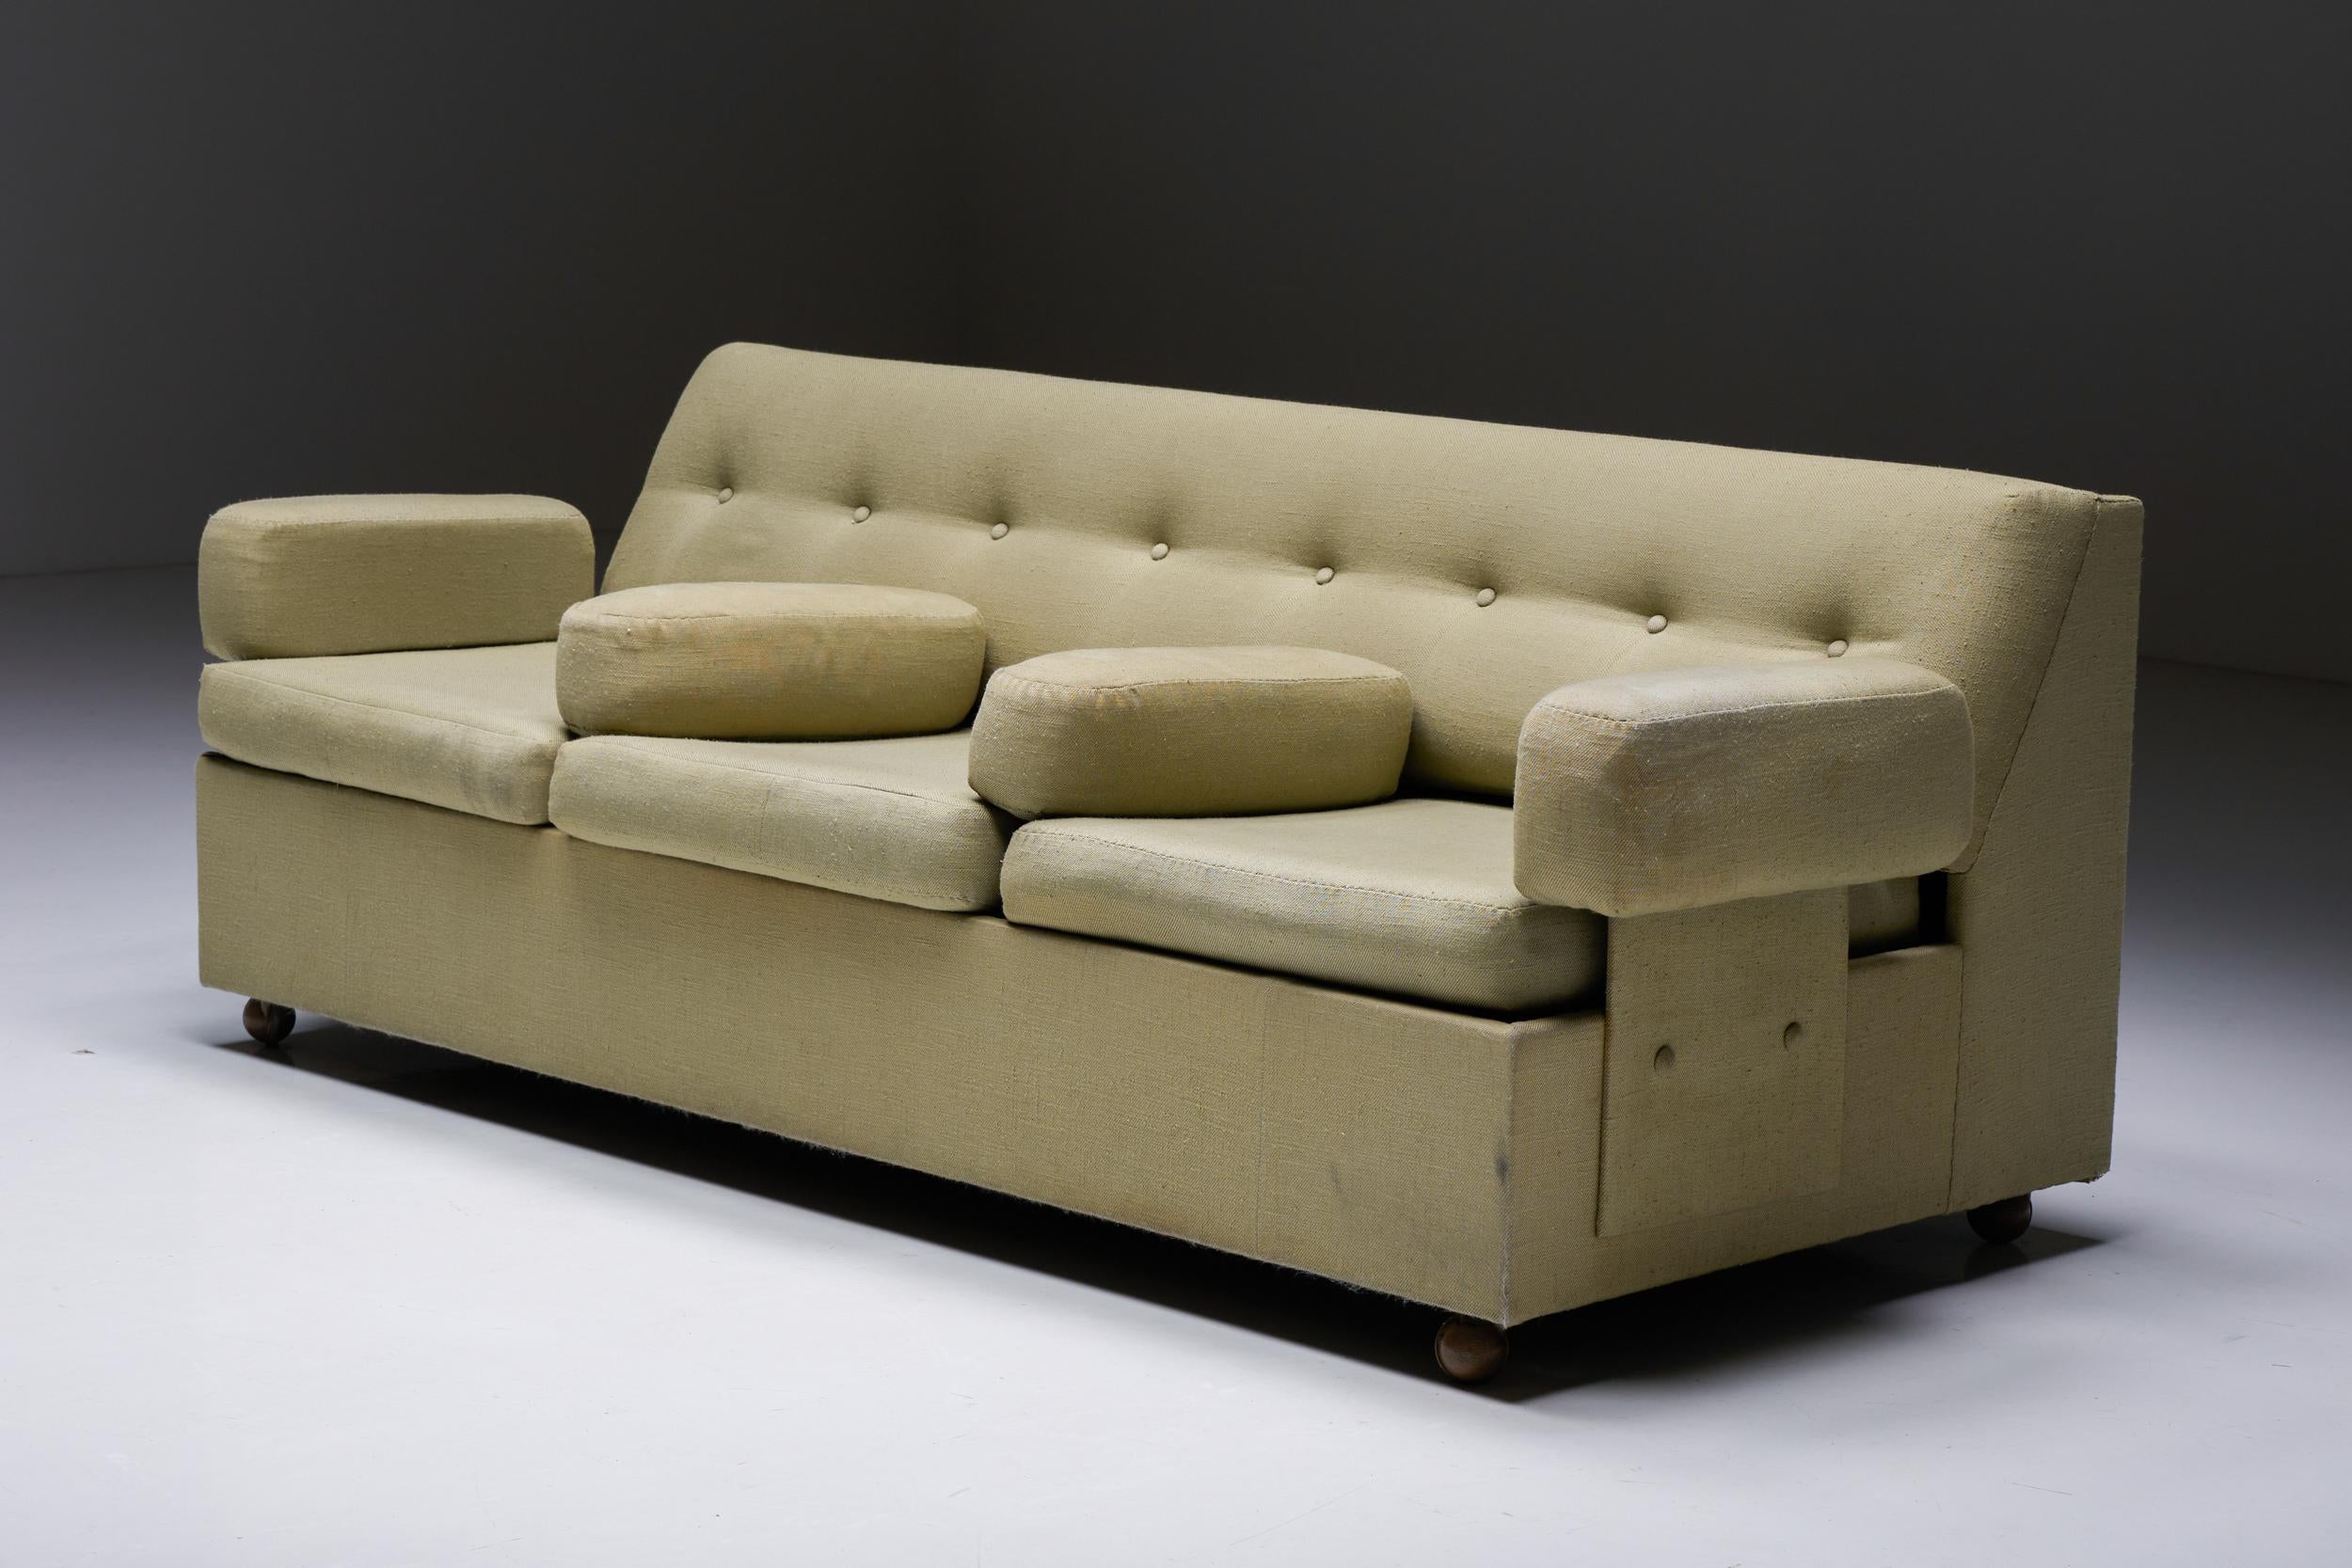 Sofa; Settee; Couch; Daybed; Green Upholstery; Fabric; Seng Company; Germany; German Design; Mid-Century Modern; Sofa-Sleeper; 

Sofa daybed in green upholstery, made in West-Germany in the 1930s. Pull out sofa bed, comfortable and practical in use.